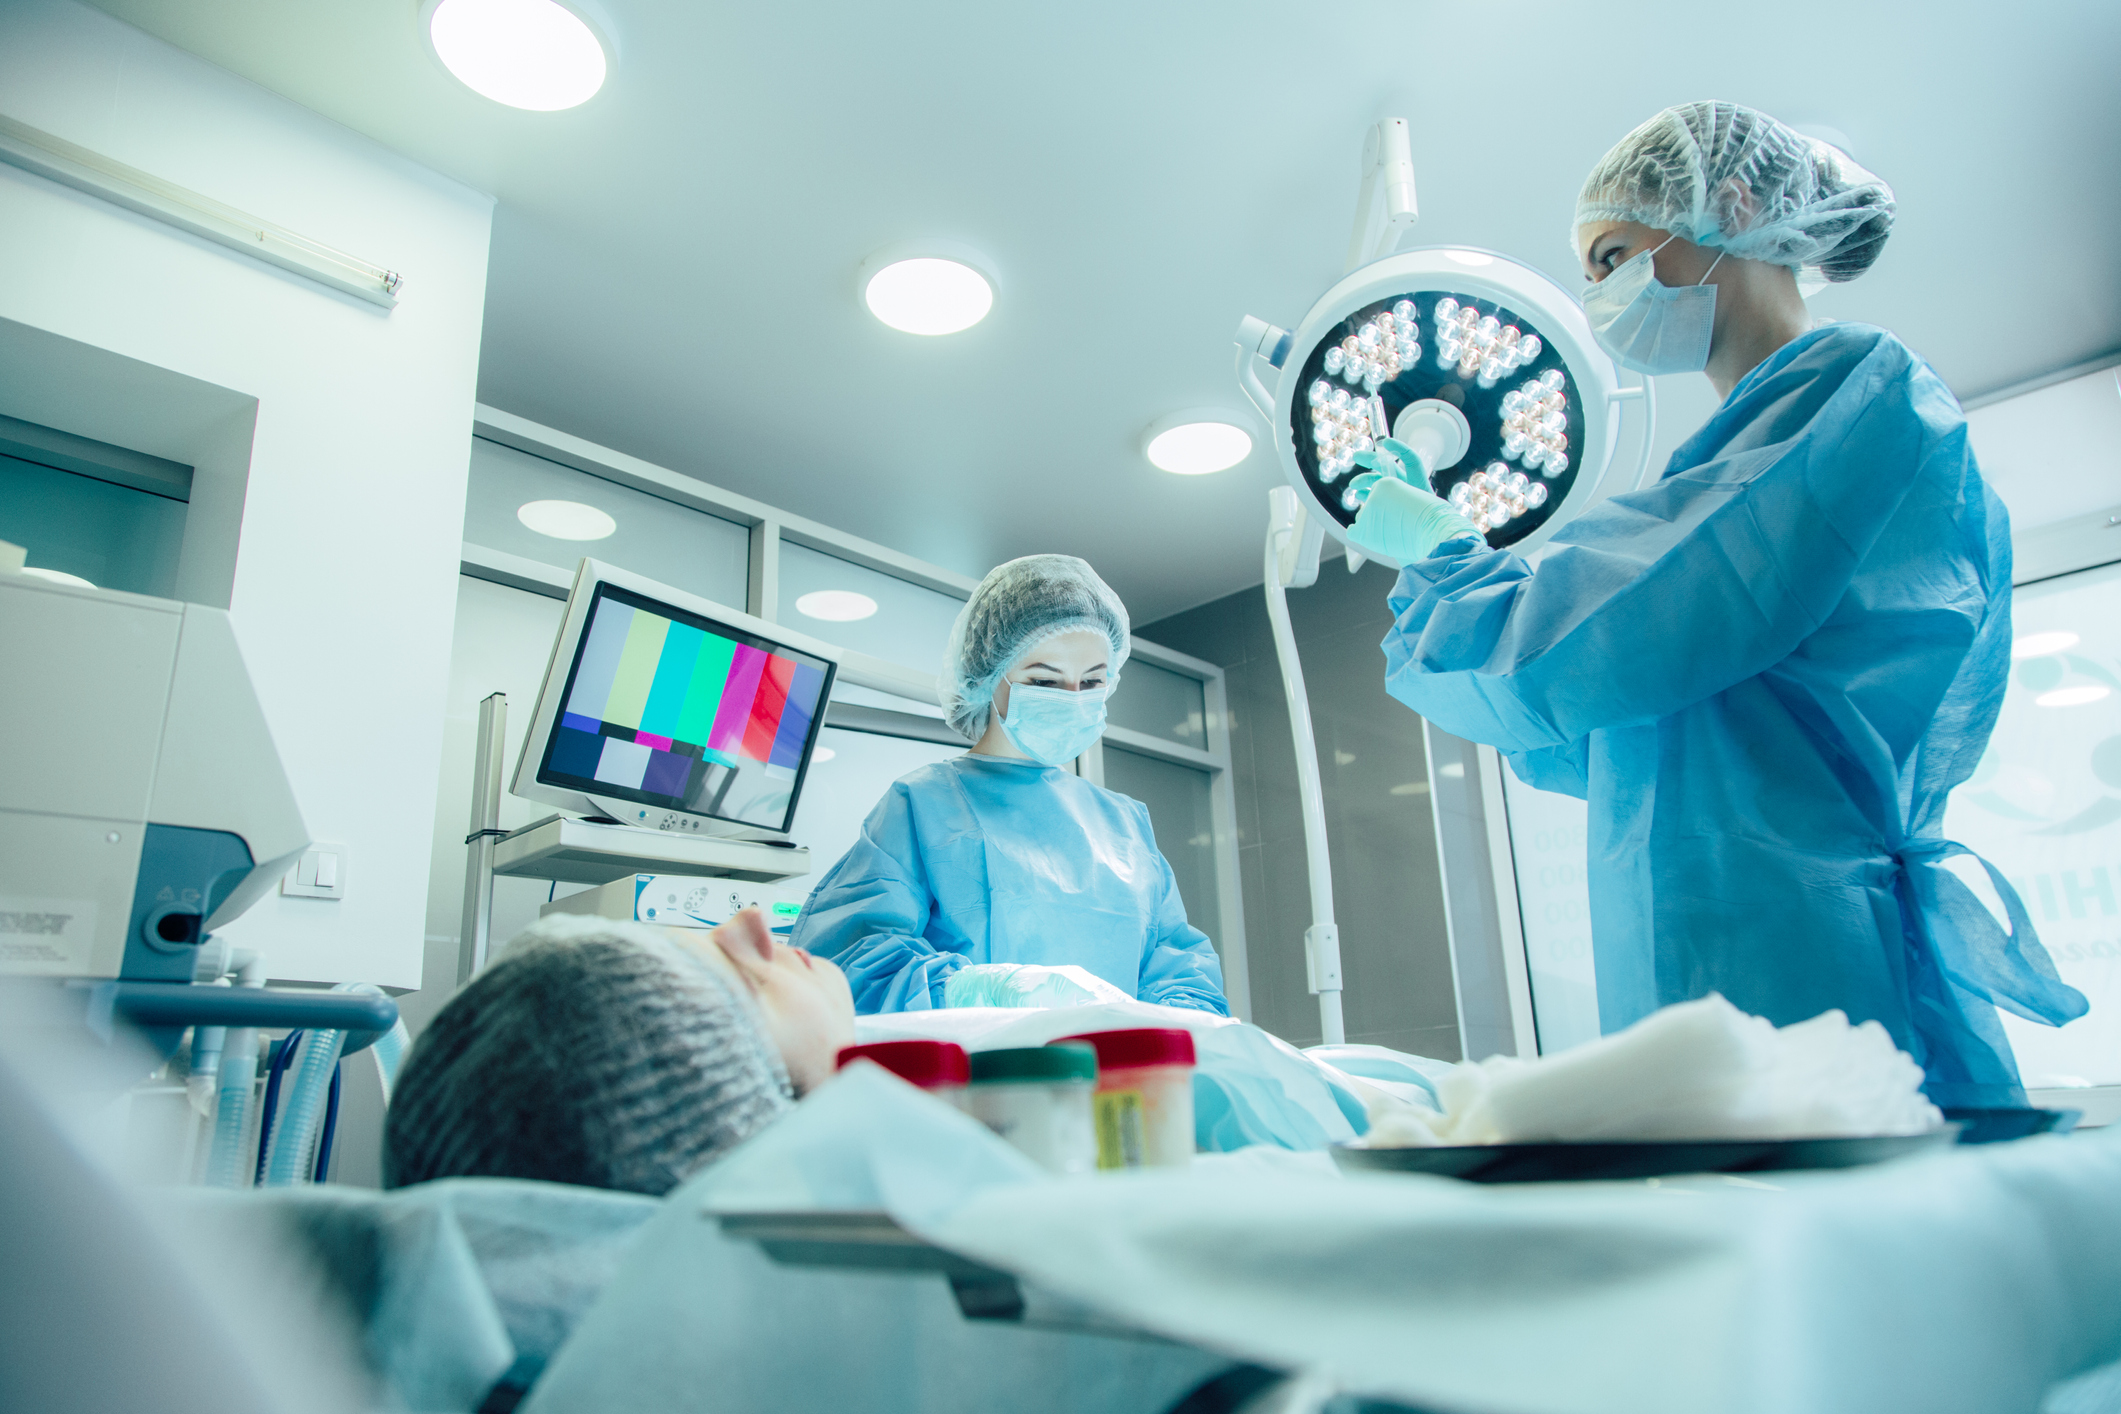 How to Become An Anesthesiologist: Training, Licensing, and Certification Requirements